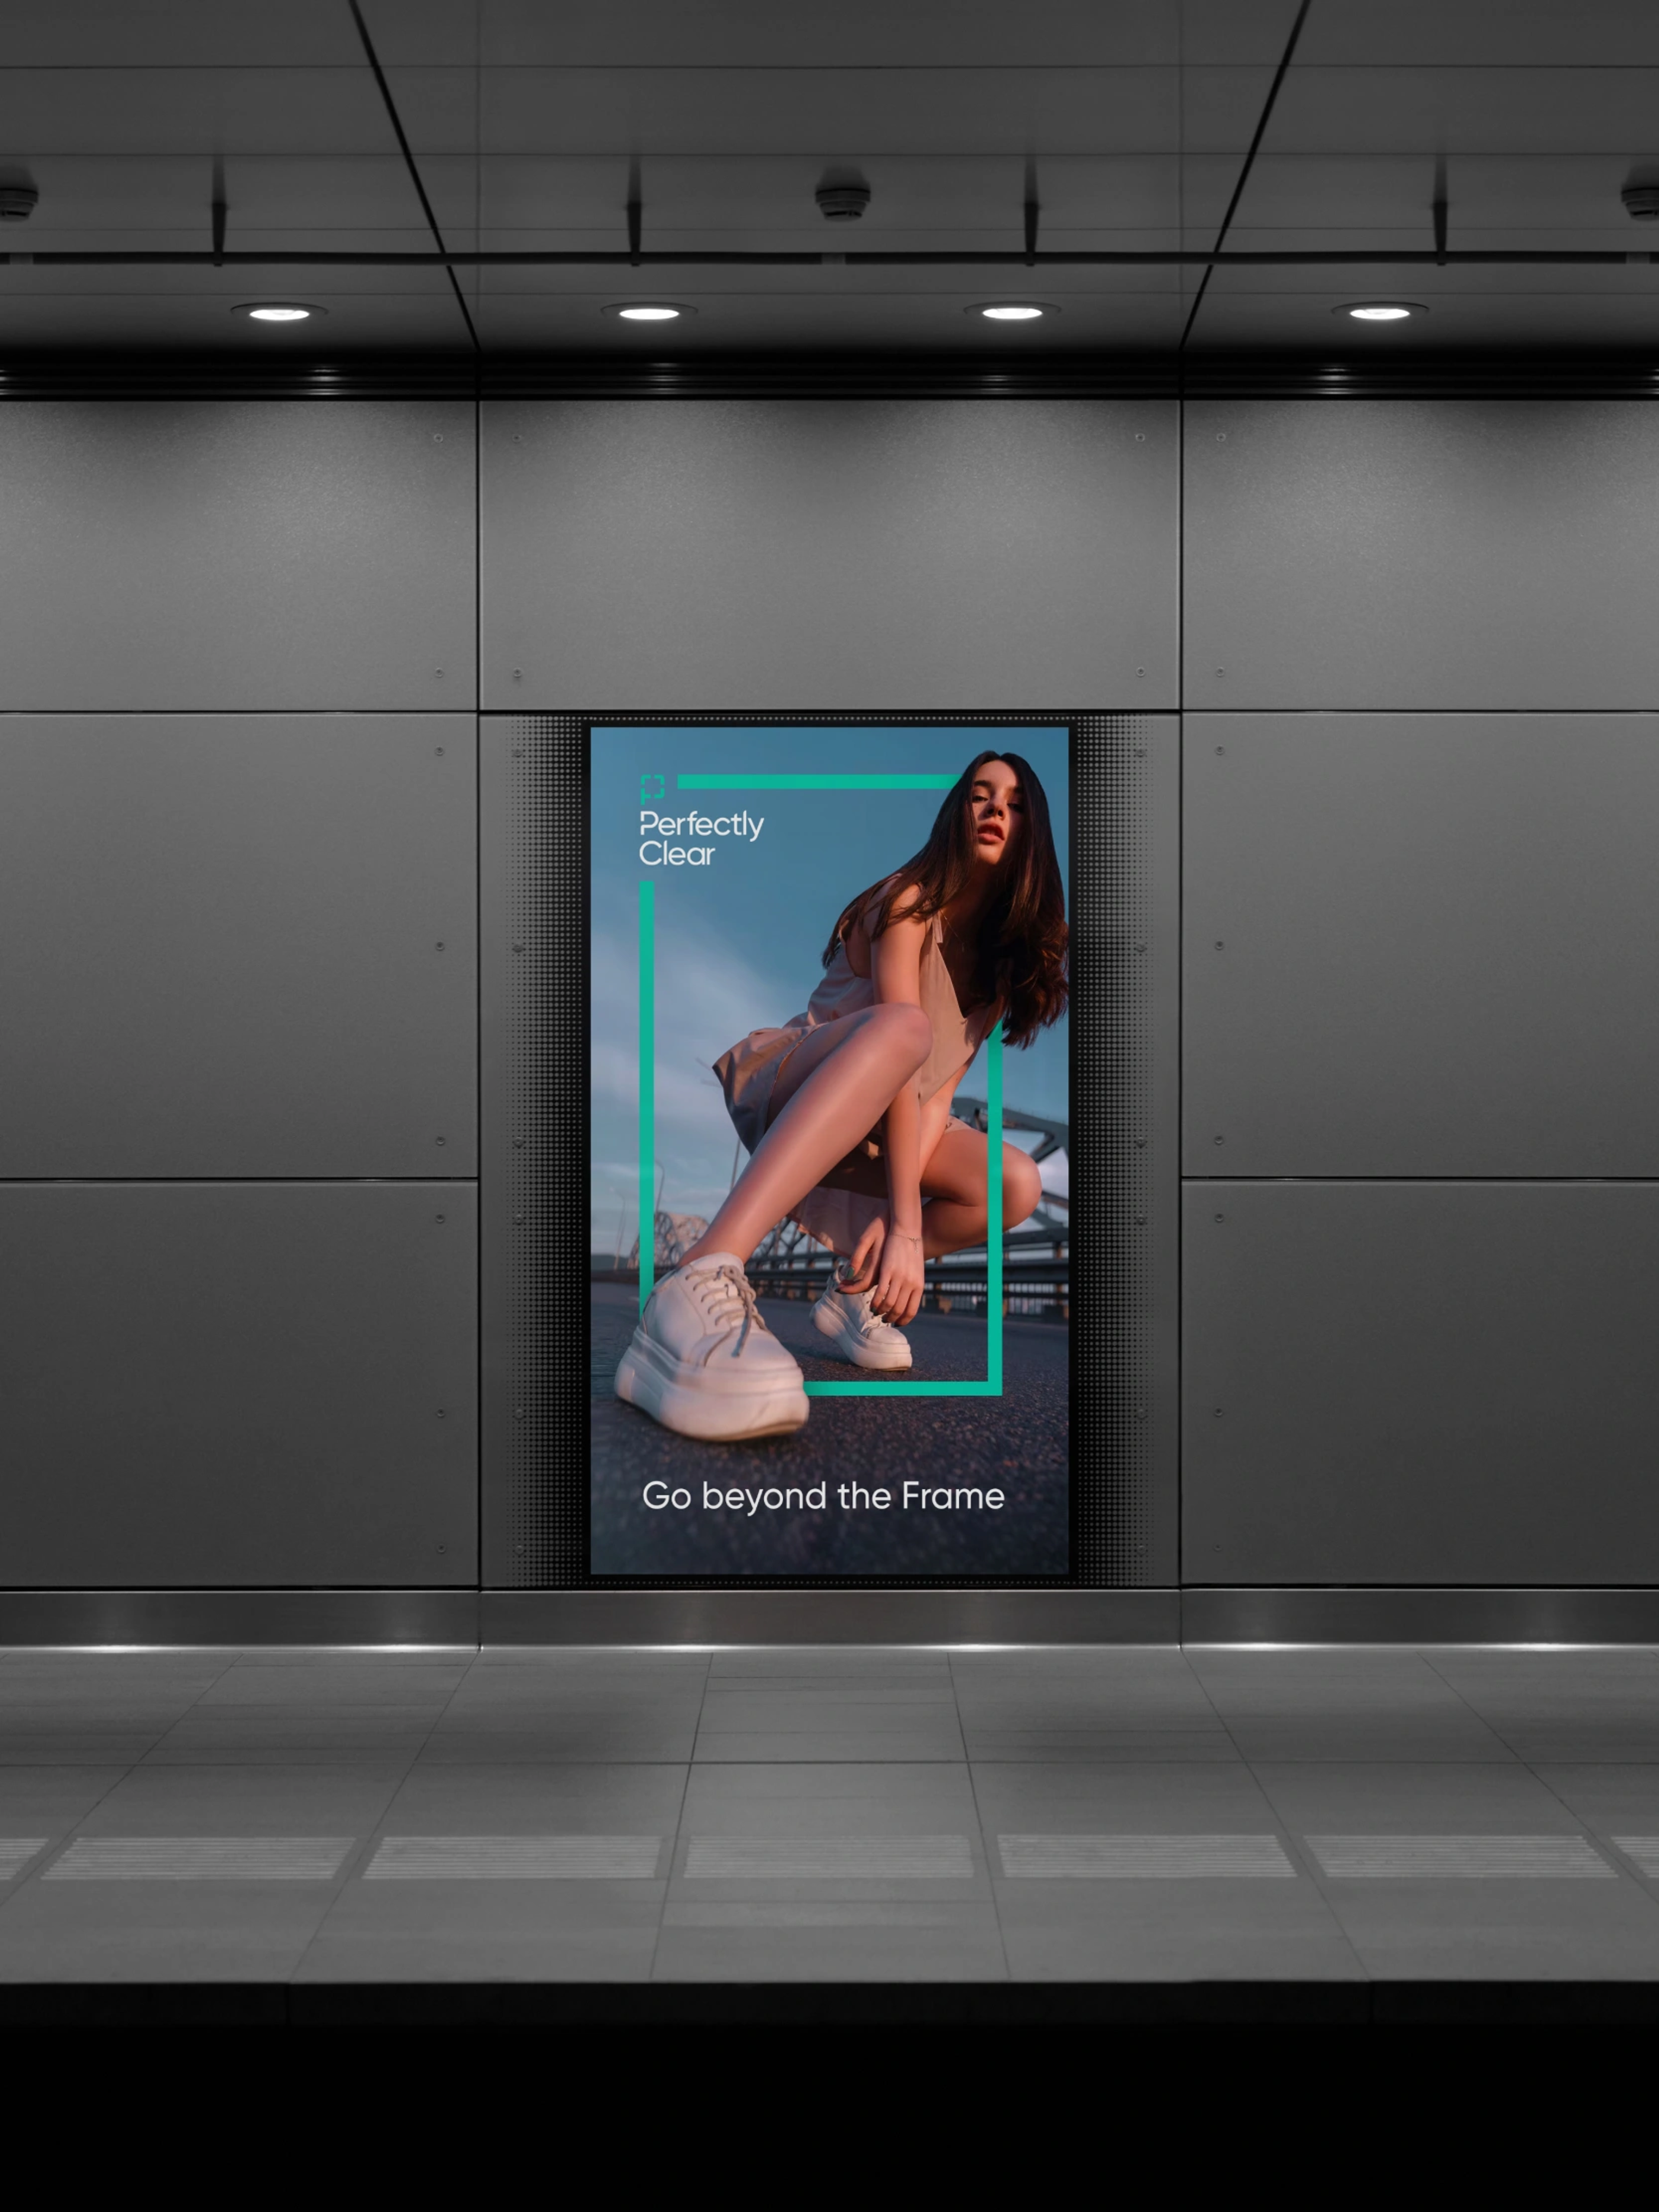 Perfectly Clear train station poster advert "Go beyond the frame"